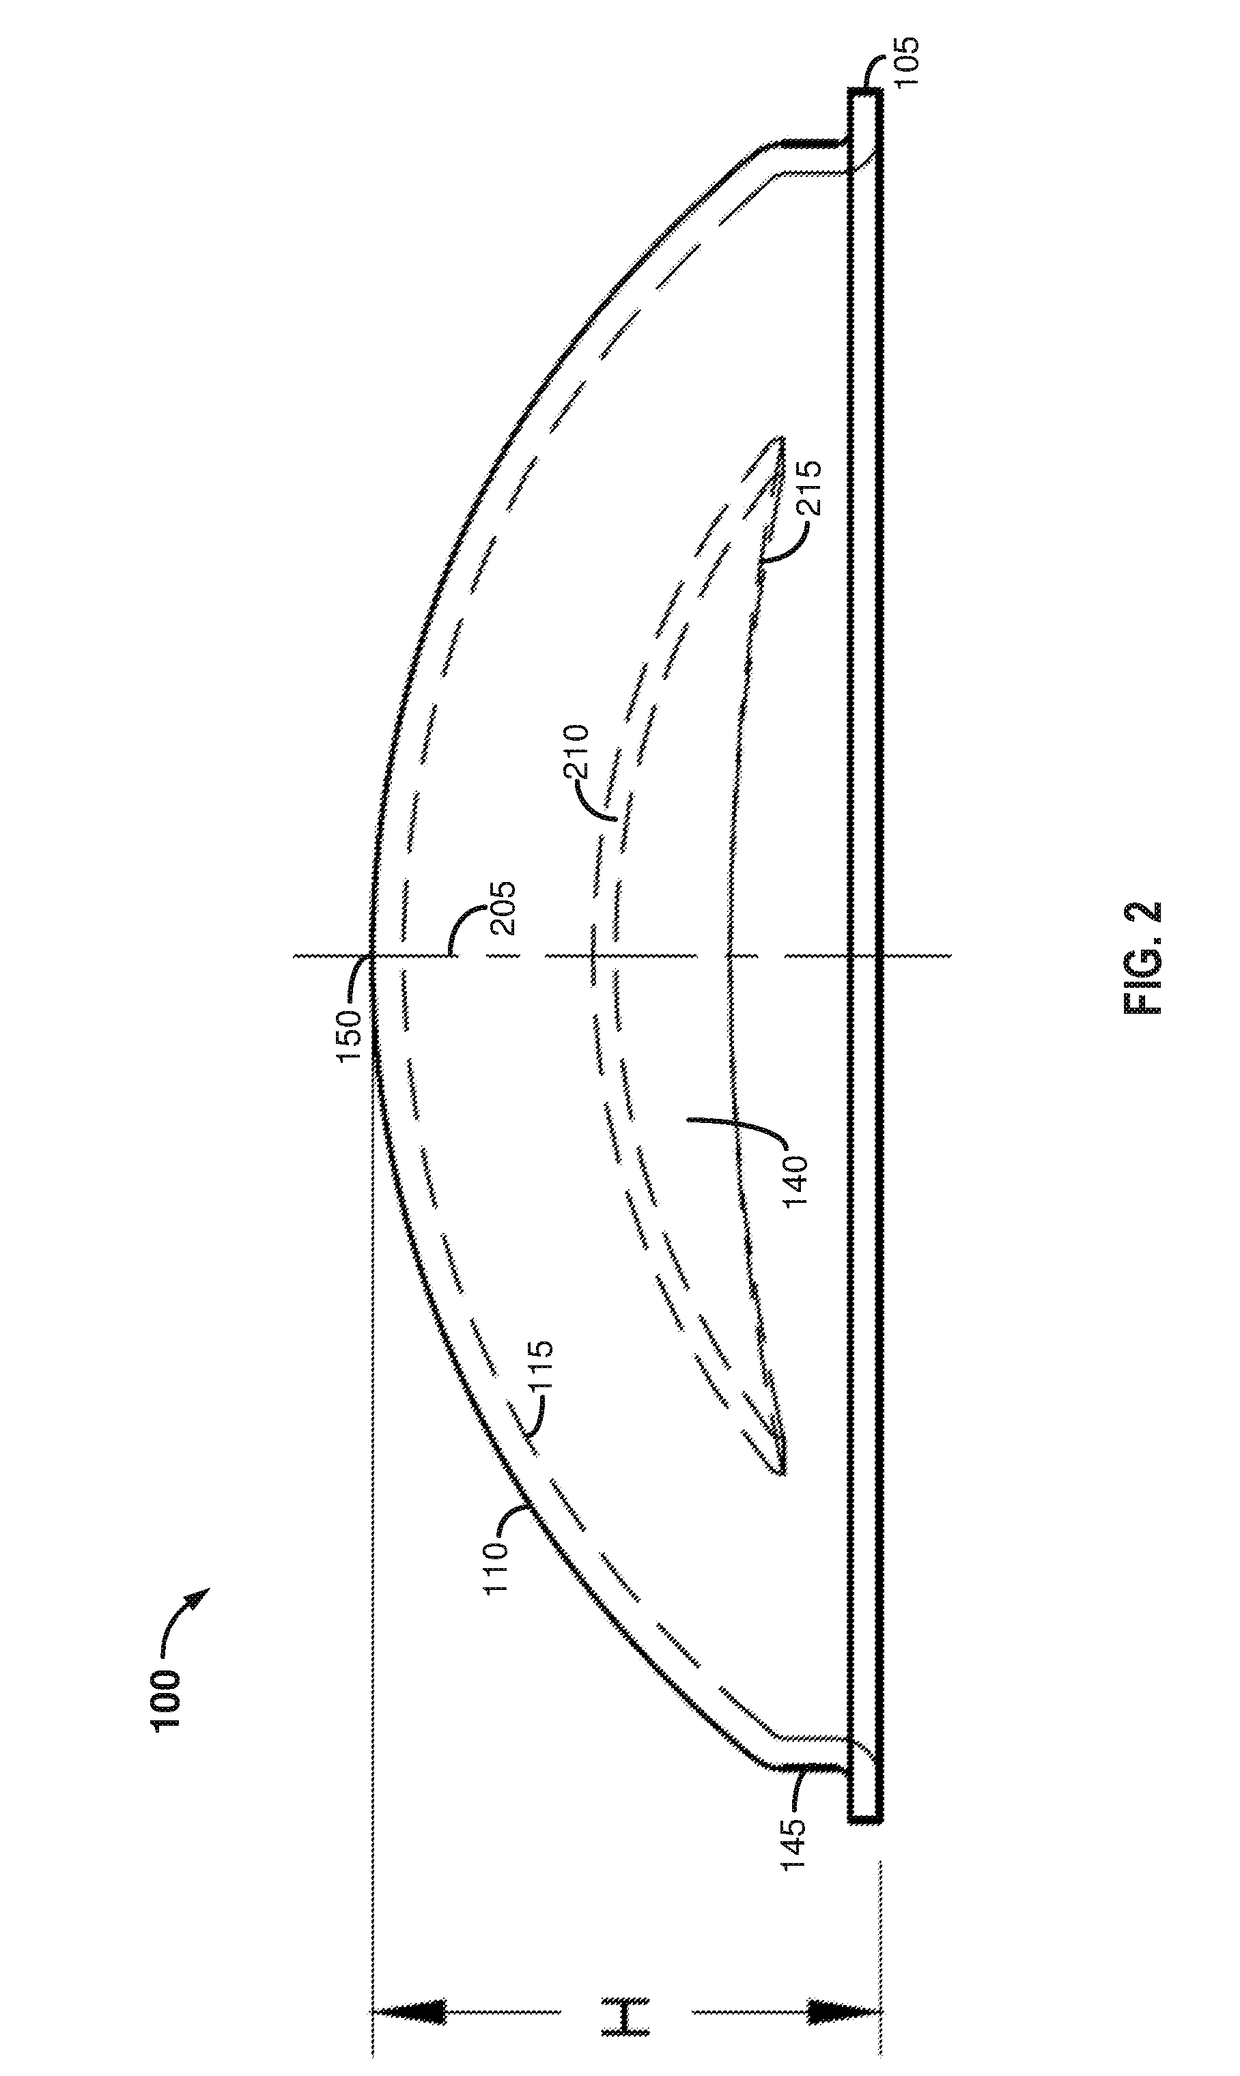 Apparatus and method for receiving and collecting breast milk leaks